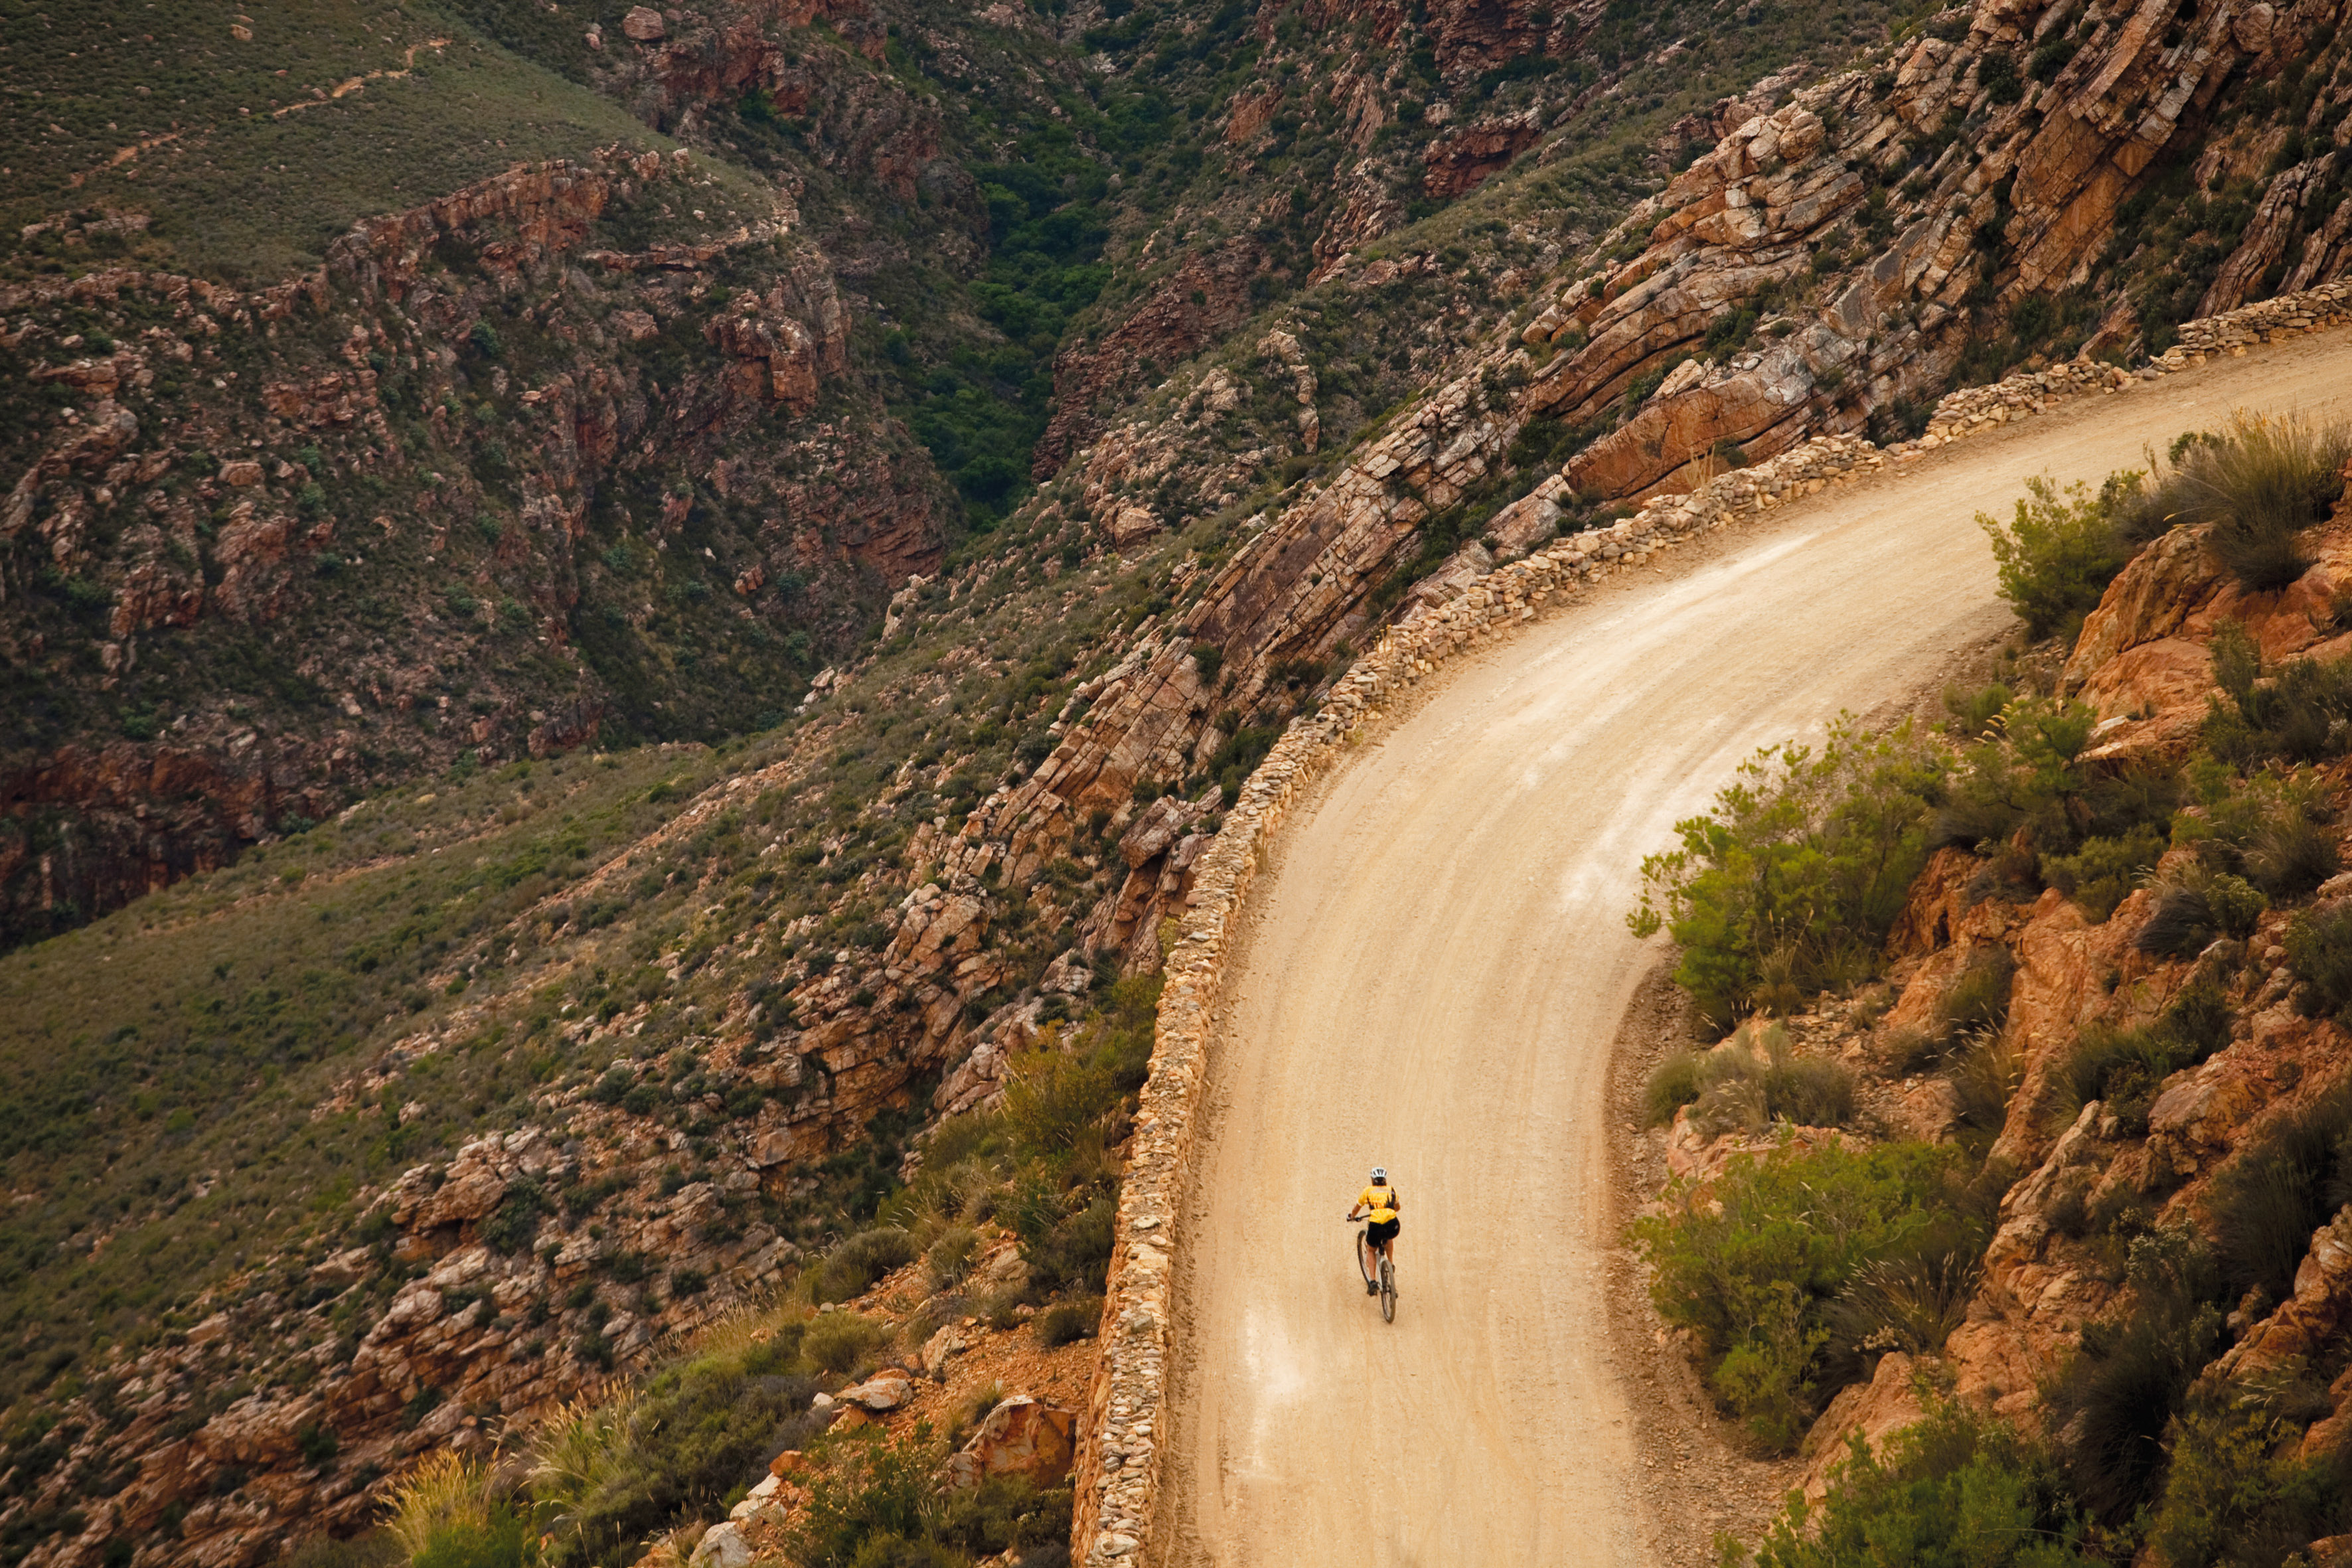 A cyclist on the Swartberg Pass, which links Prince Albert and Oudtshoorn